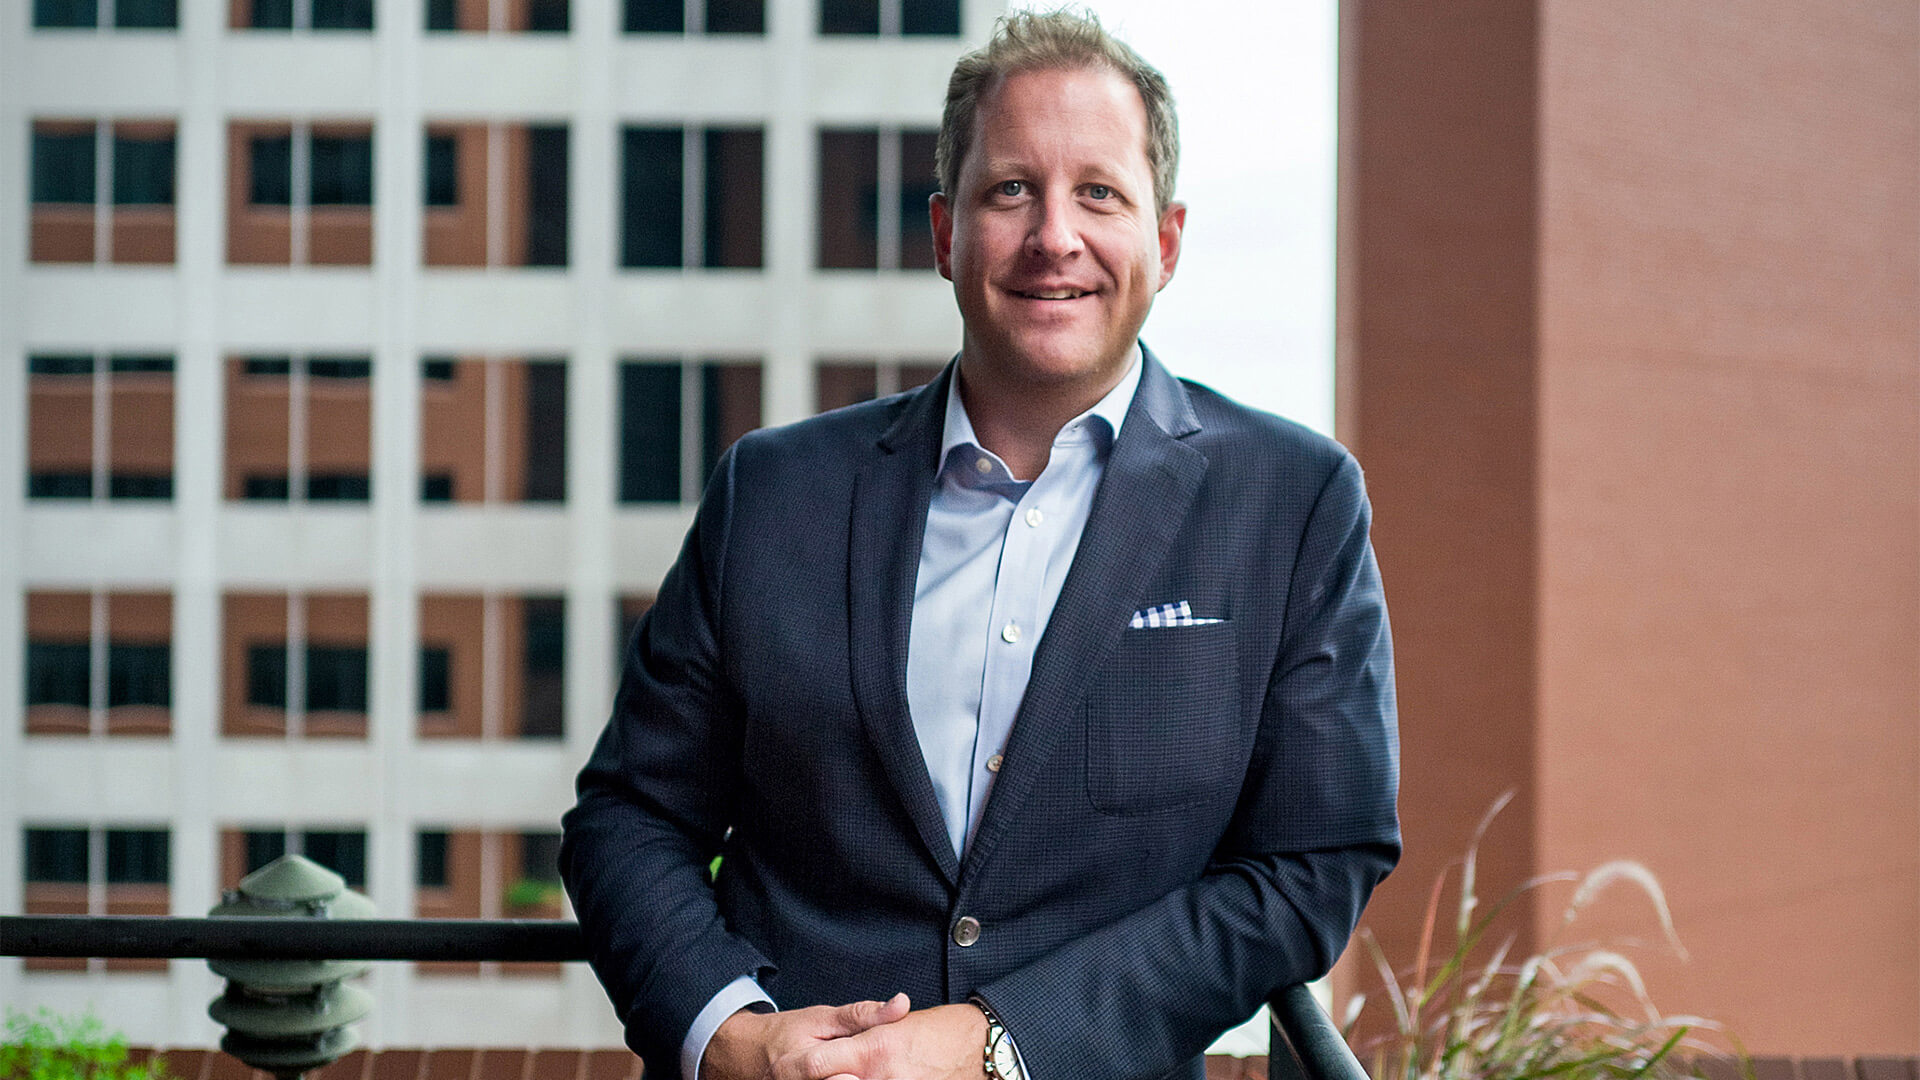 Andrew Dauska, CEO of St. Louis Ad Agency Rodgers Townsend